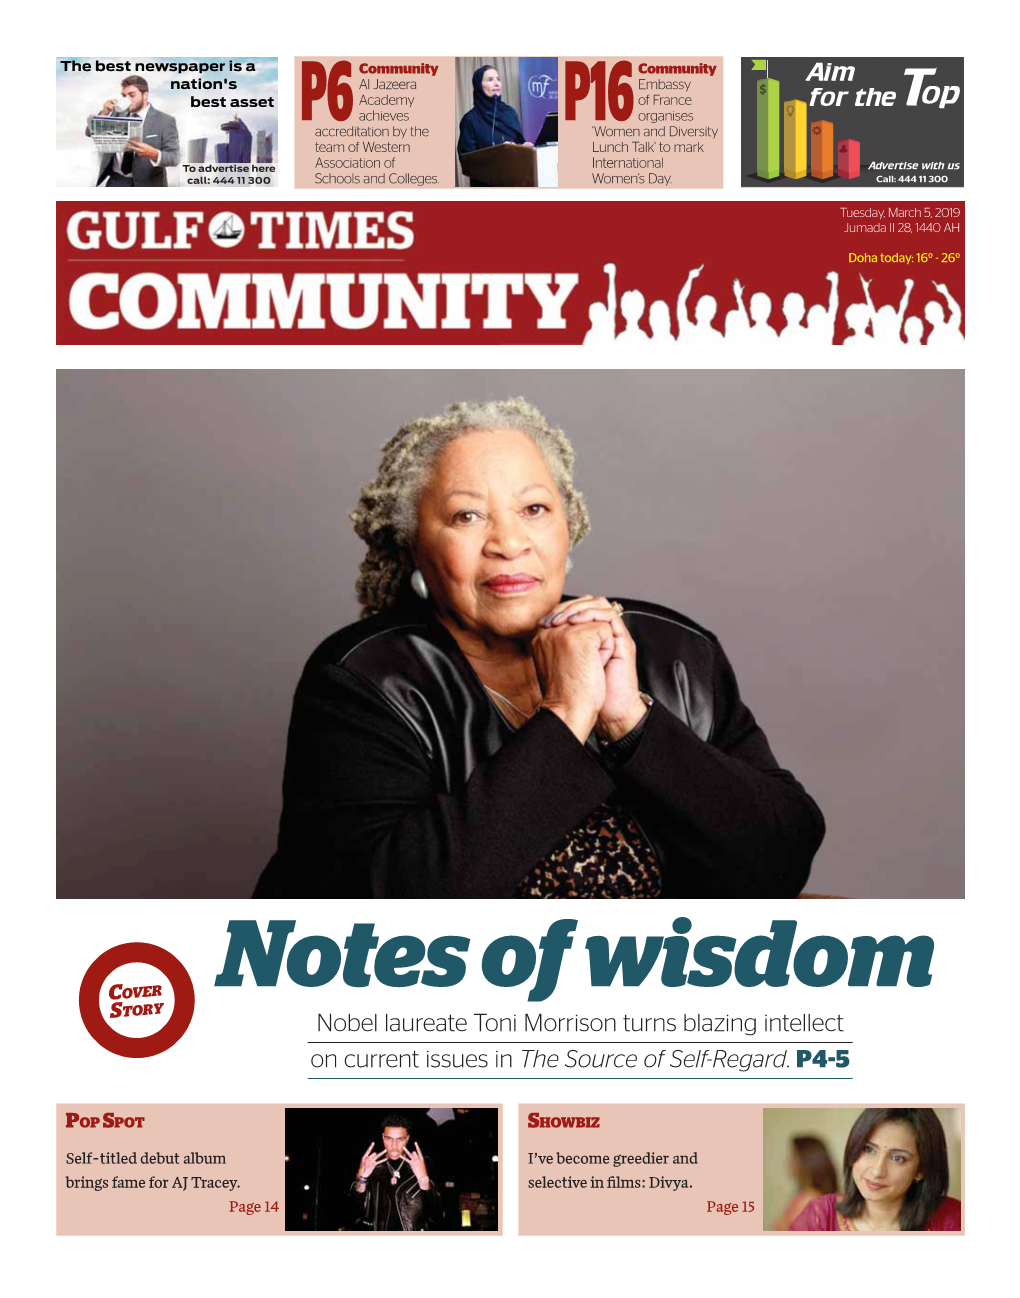 Nobel Laureate Toni Morrison Turns Blazing Intellect on Current Issues in the Source of Self-Regard